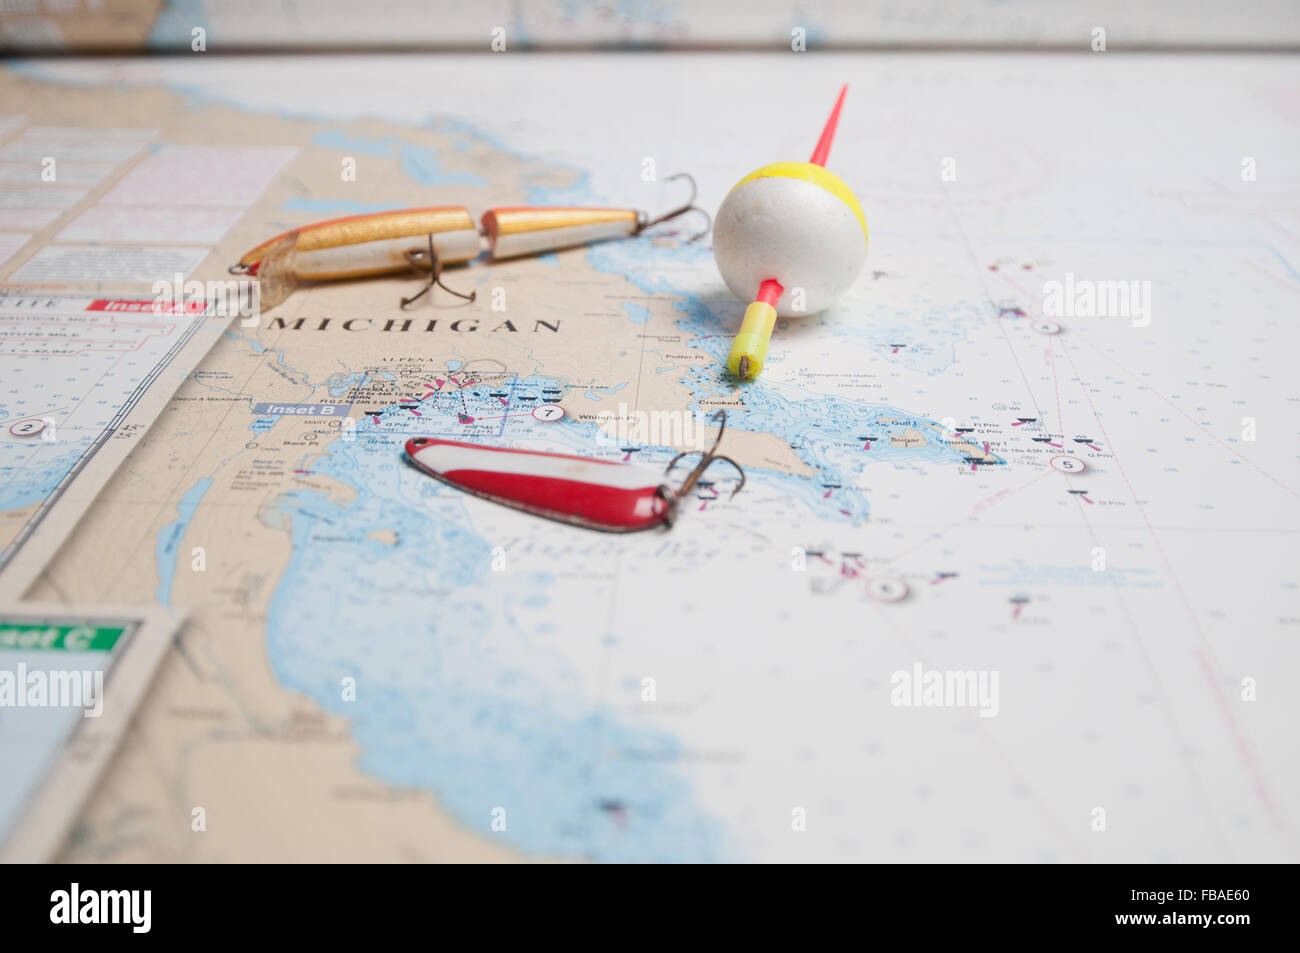 Fishing, boating, navigation; all require survival skills on the Great Lakes. Stock Photo